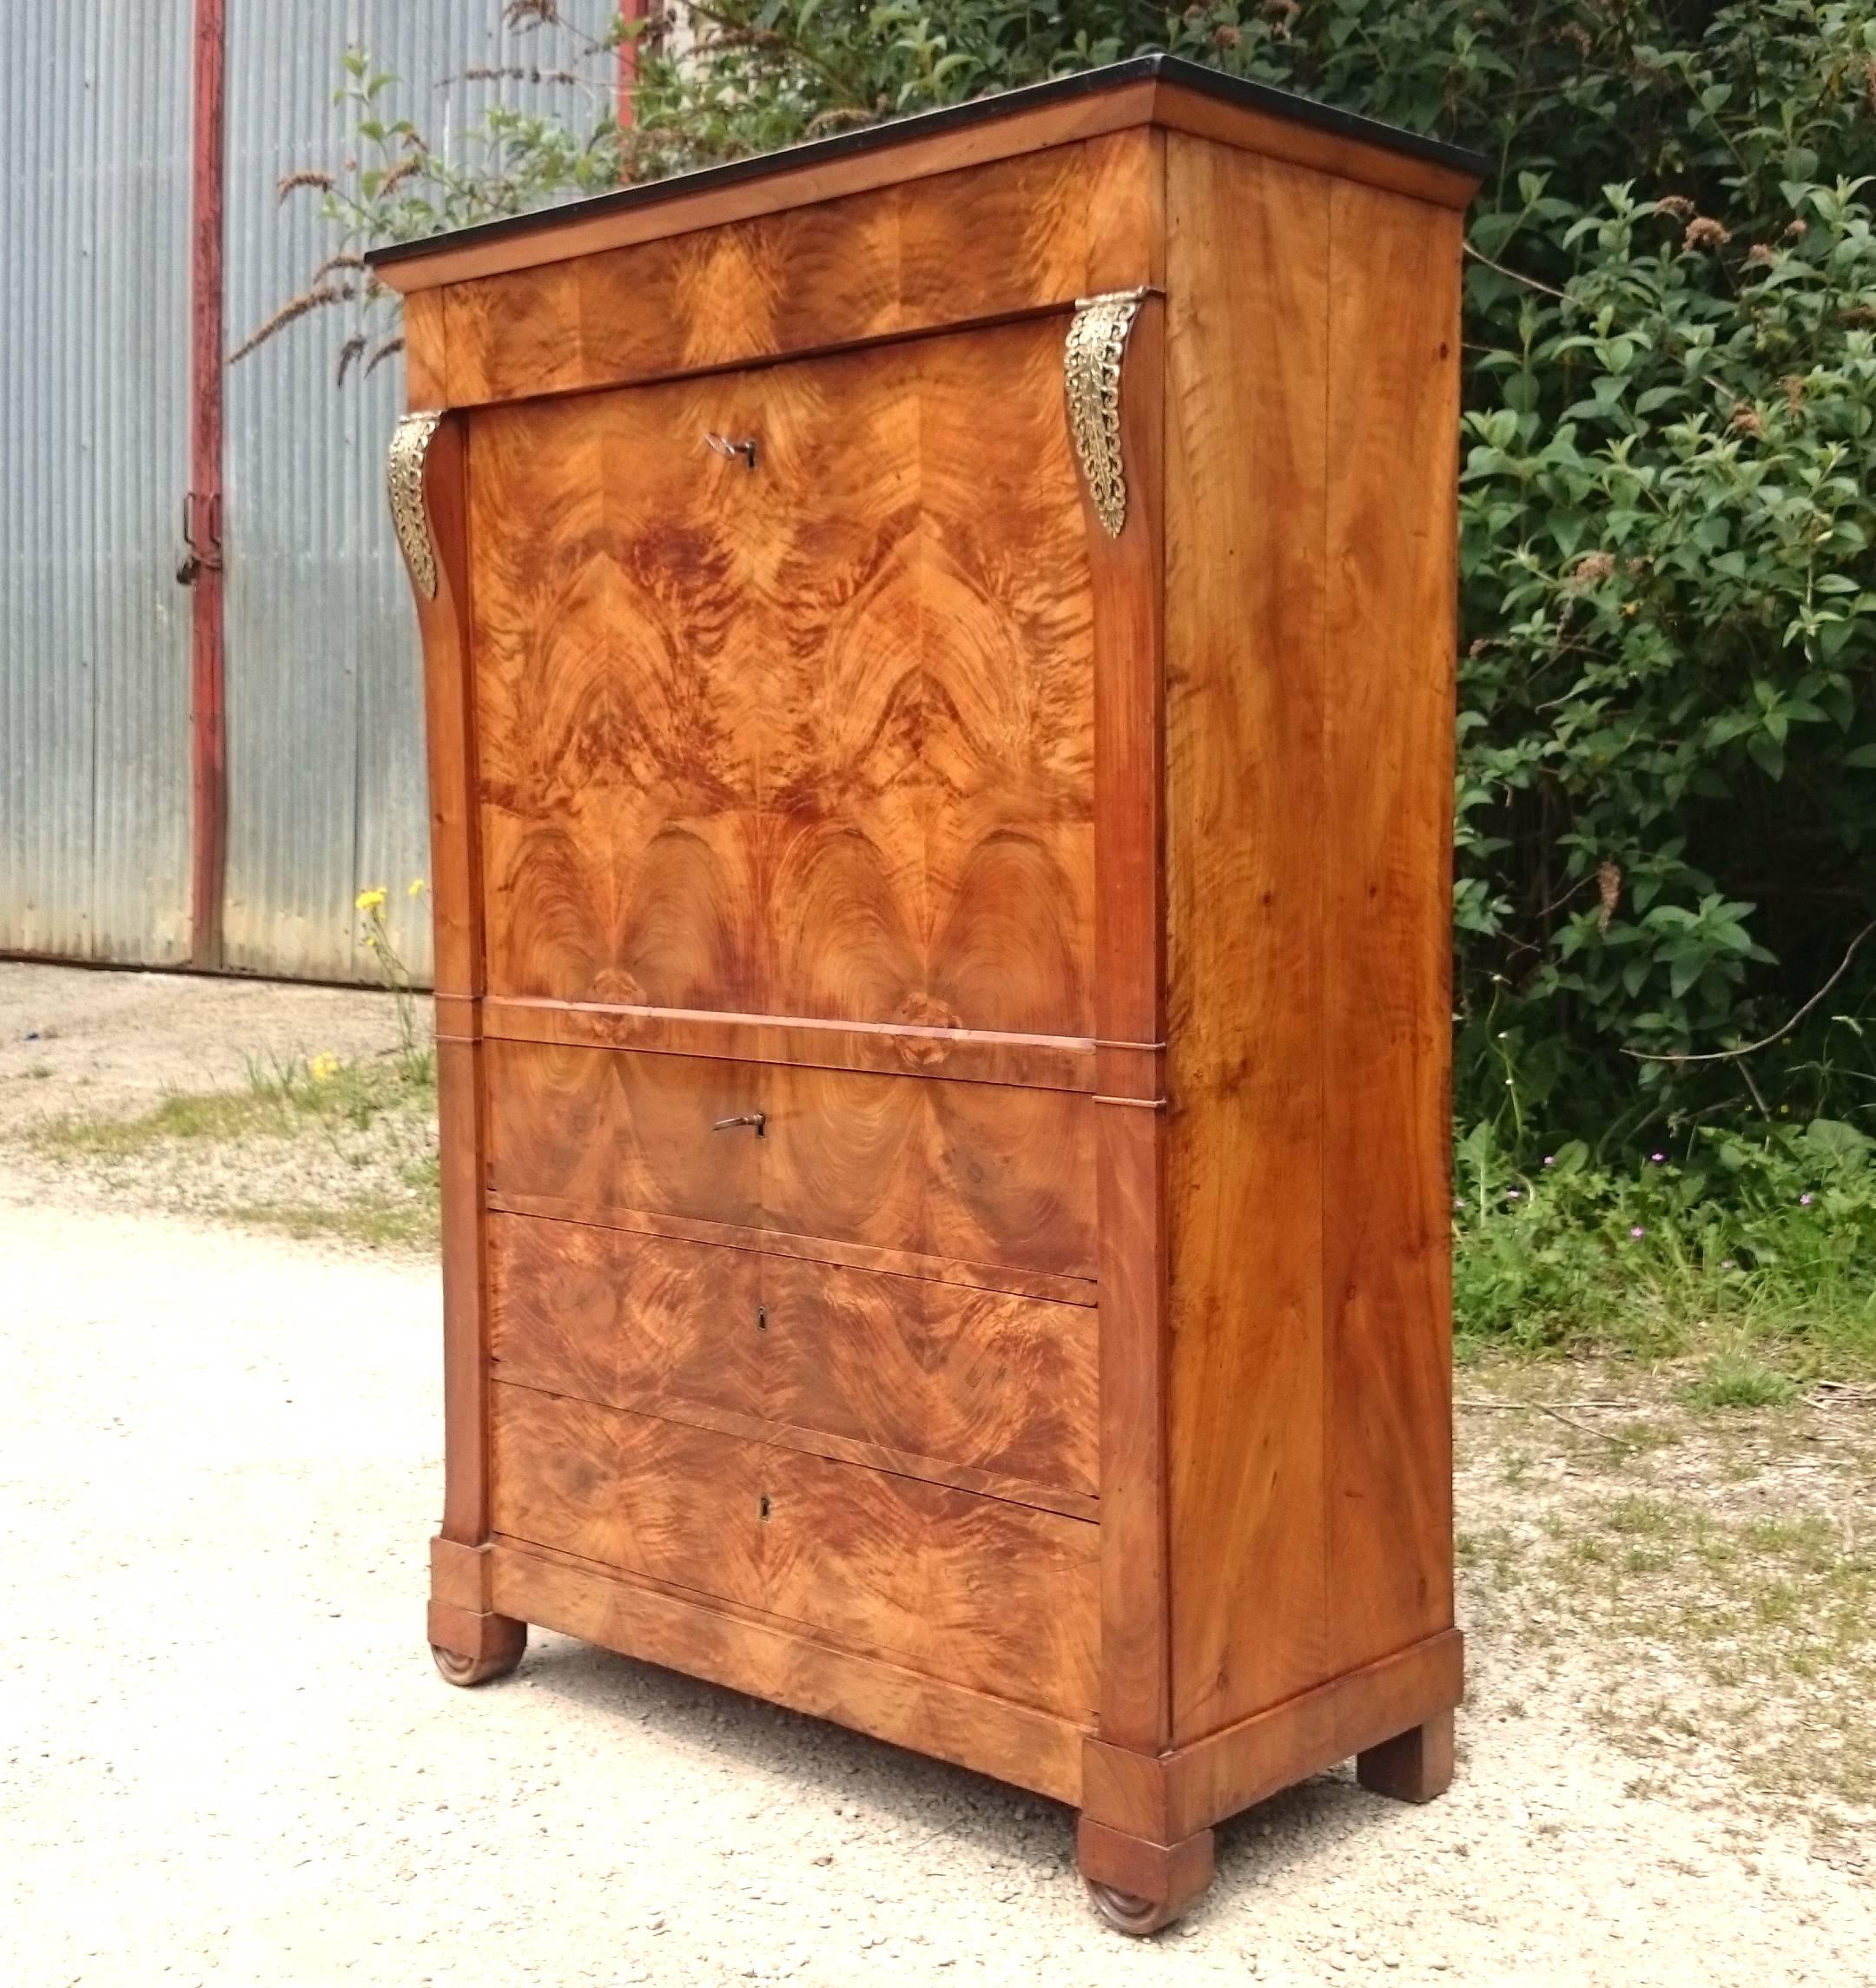 French Antique Secrétaire à Abattant or Fall Front Secretary